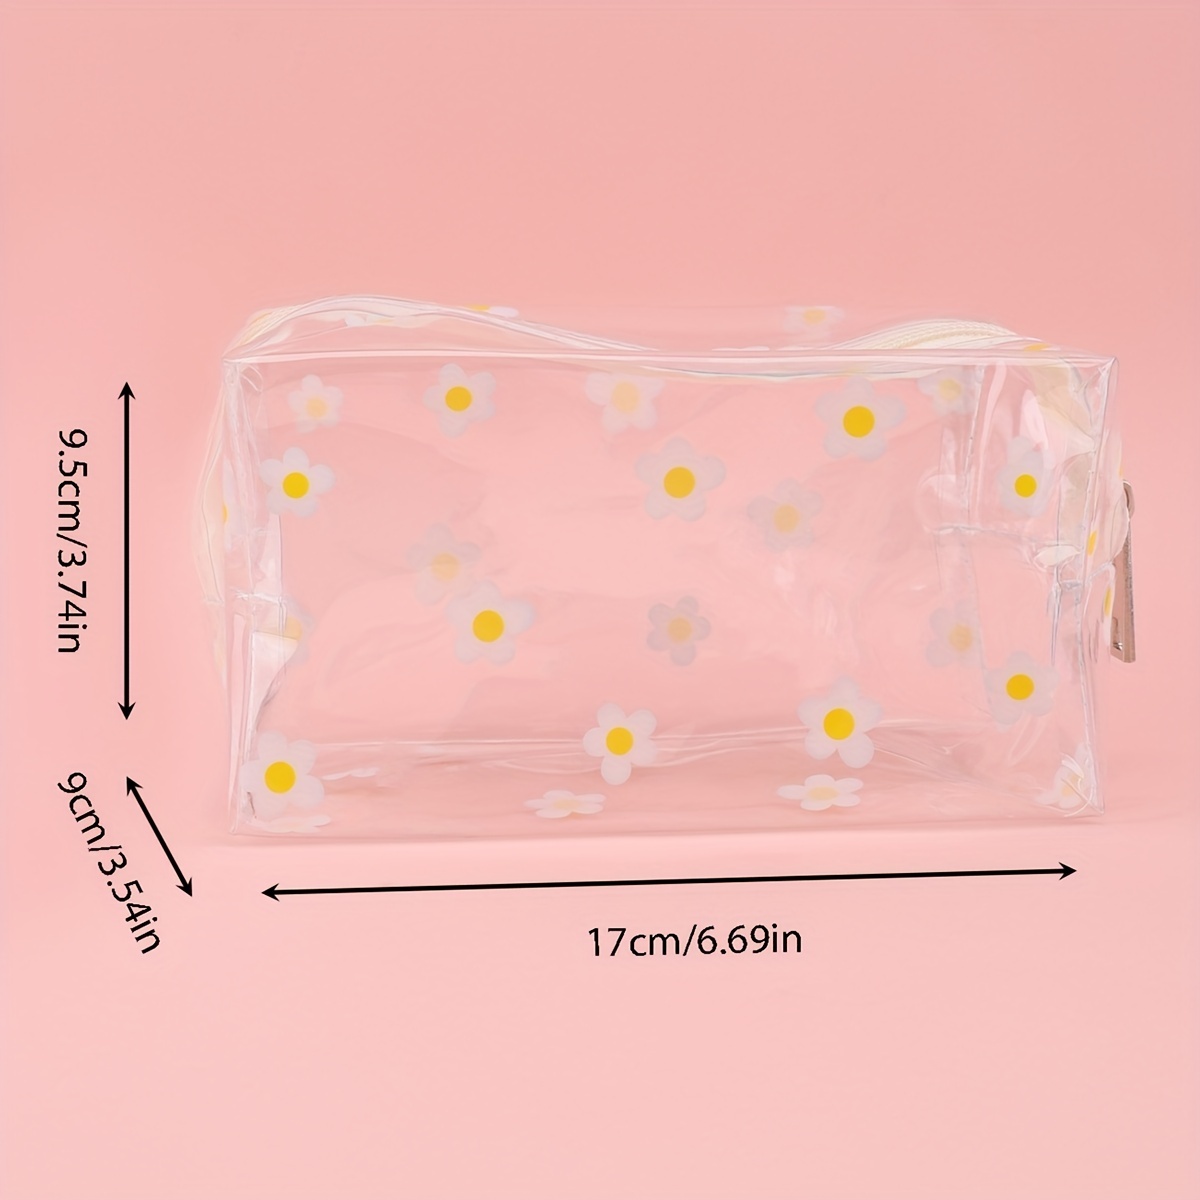 Kawaii Cute Pencil Bag Small Flowers Pencil Cases Cute Simple Pen Bag  Storage Bags School Supplies Stationery Gift For Kids